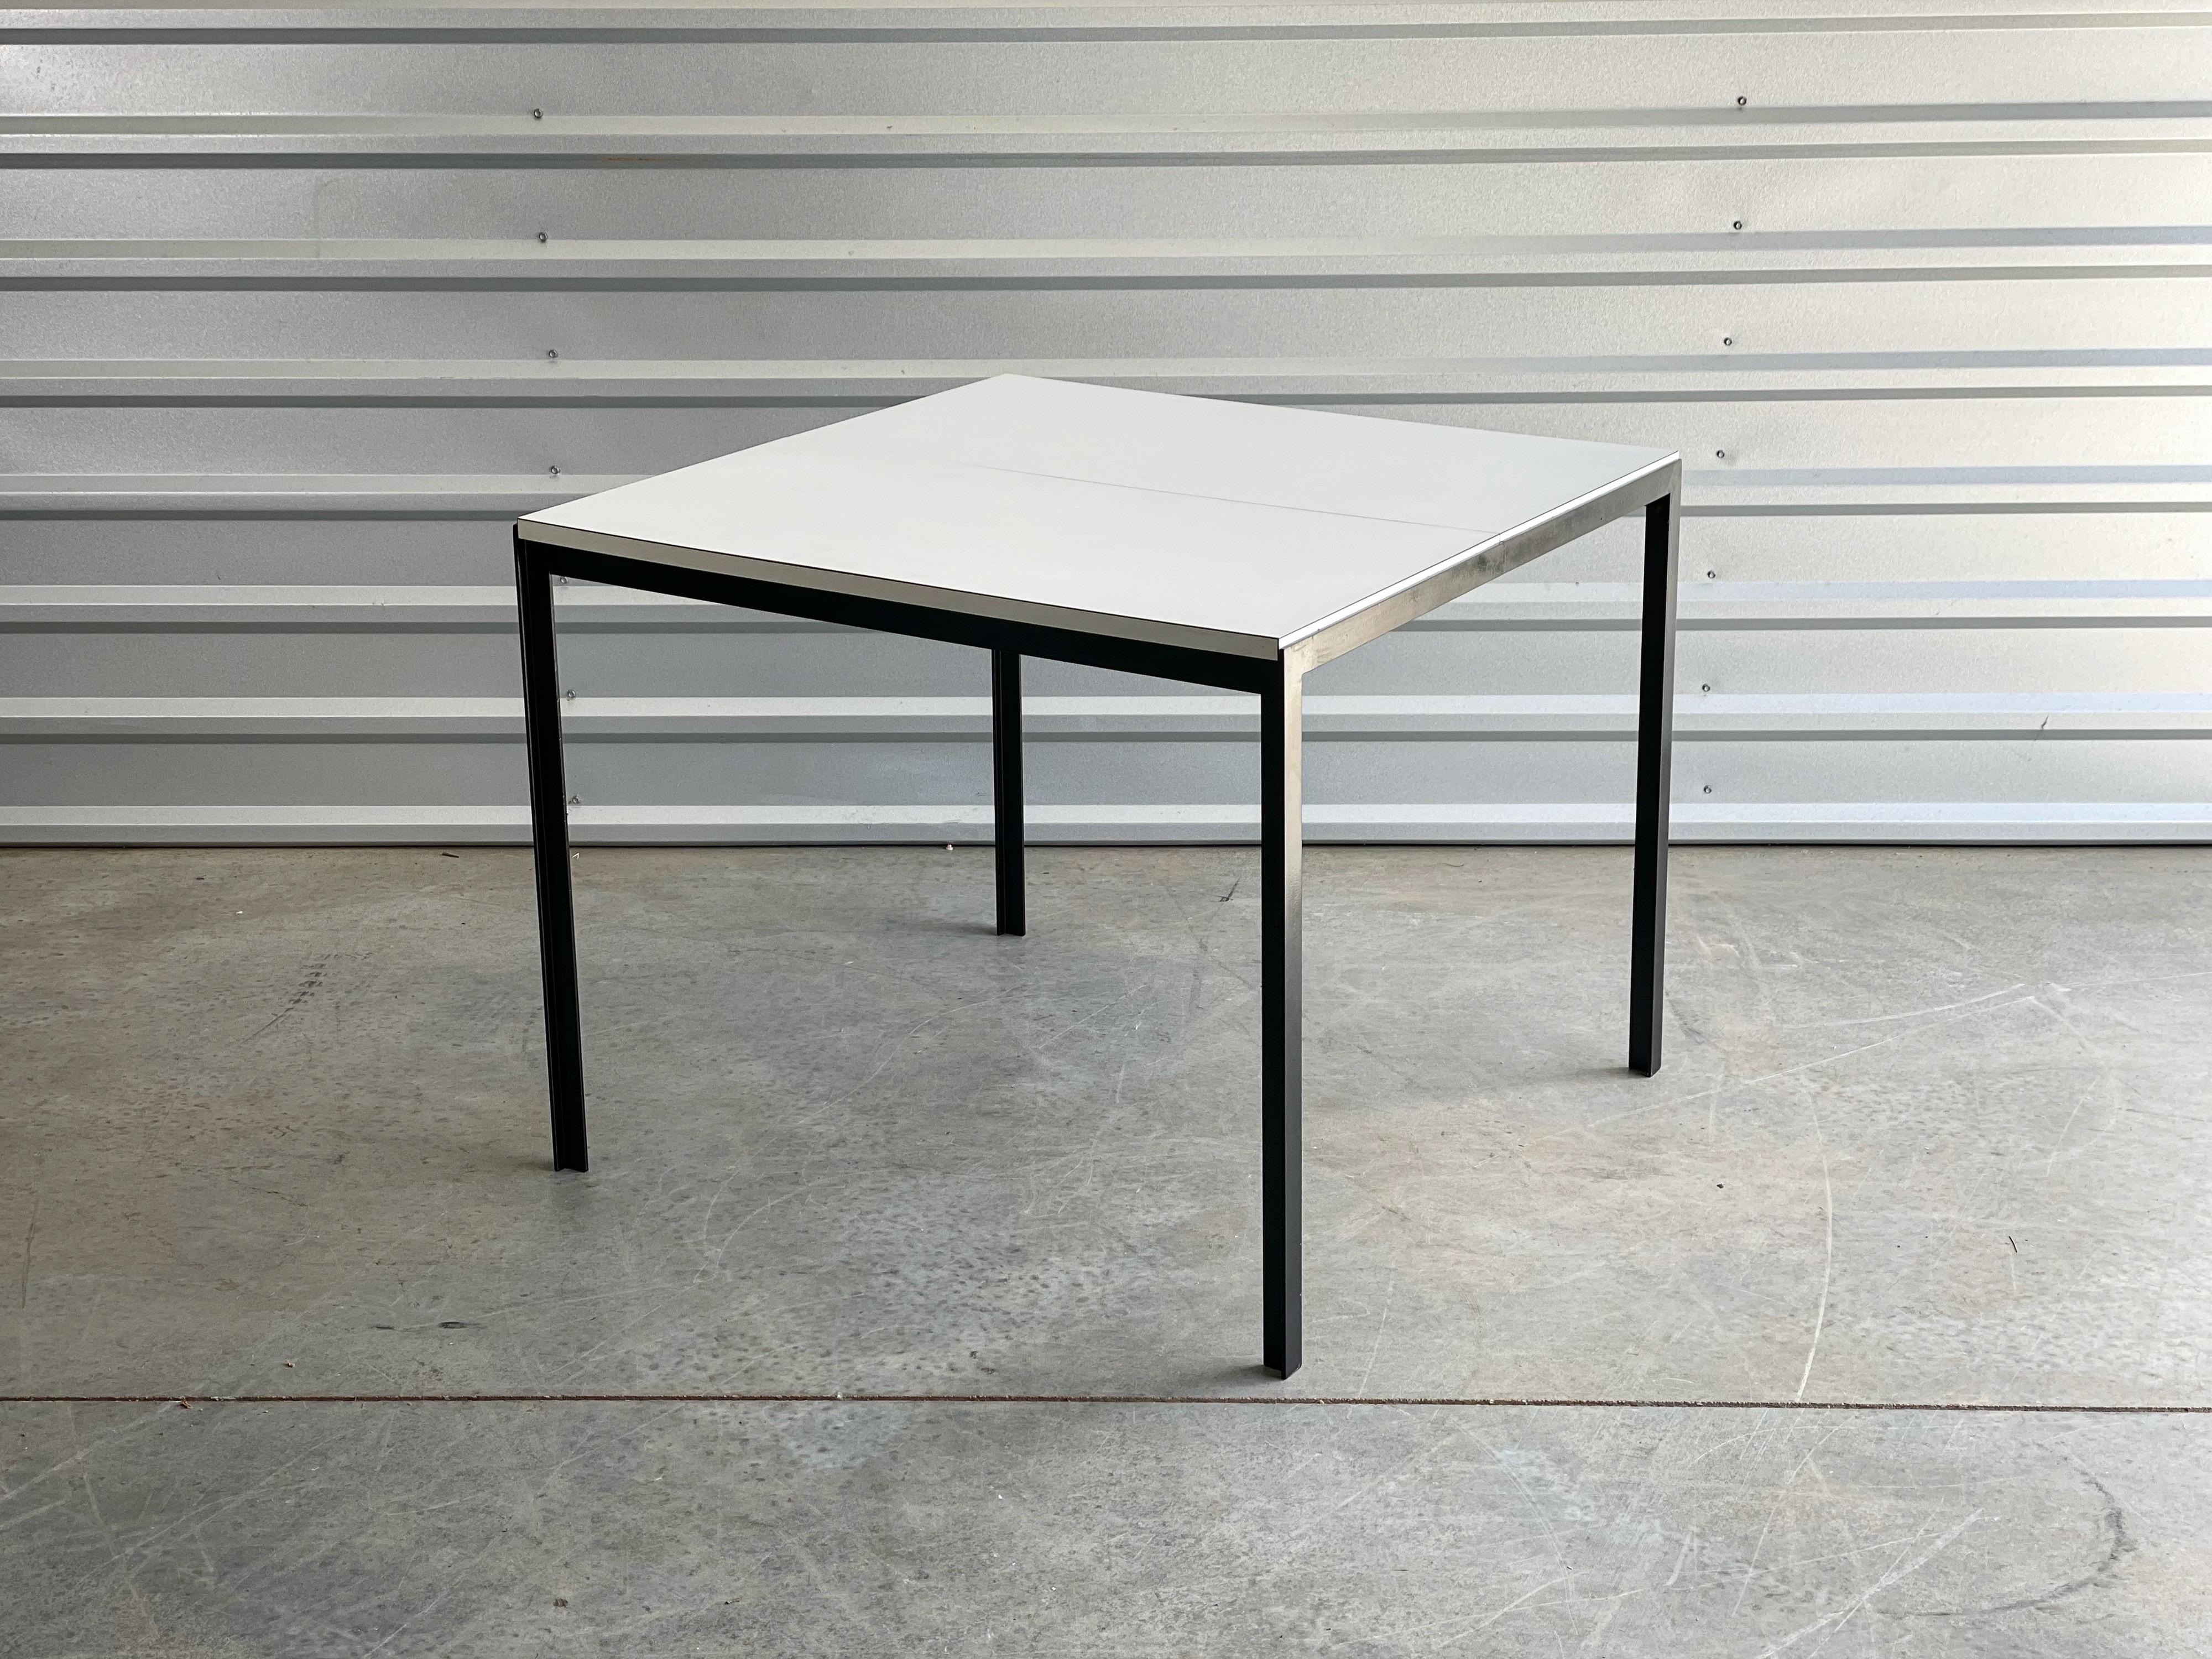 Seldom seen T Angle dining table with butterfly leaf by Florence Knoll, circa early 1960's. Black angle iron frame with a white formica top. Seats for with the leaf stowed below and up to six with the leaf extended; perfect for a small space. Very